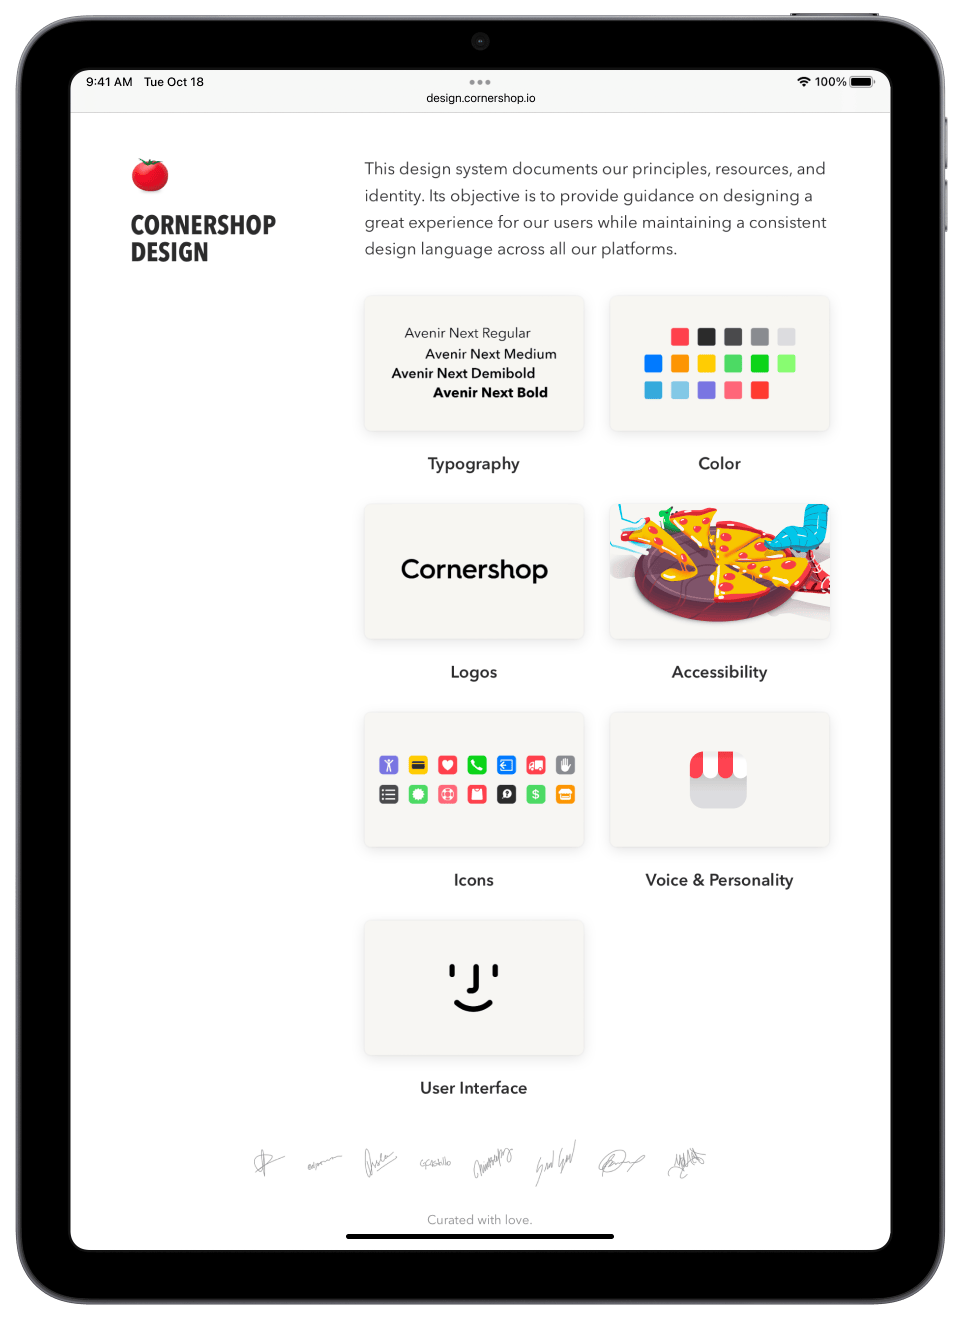 iPad Pro displaying a design principles website with illustrations.